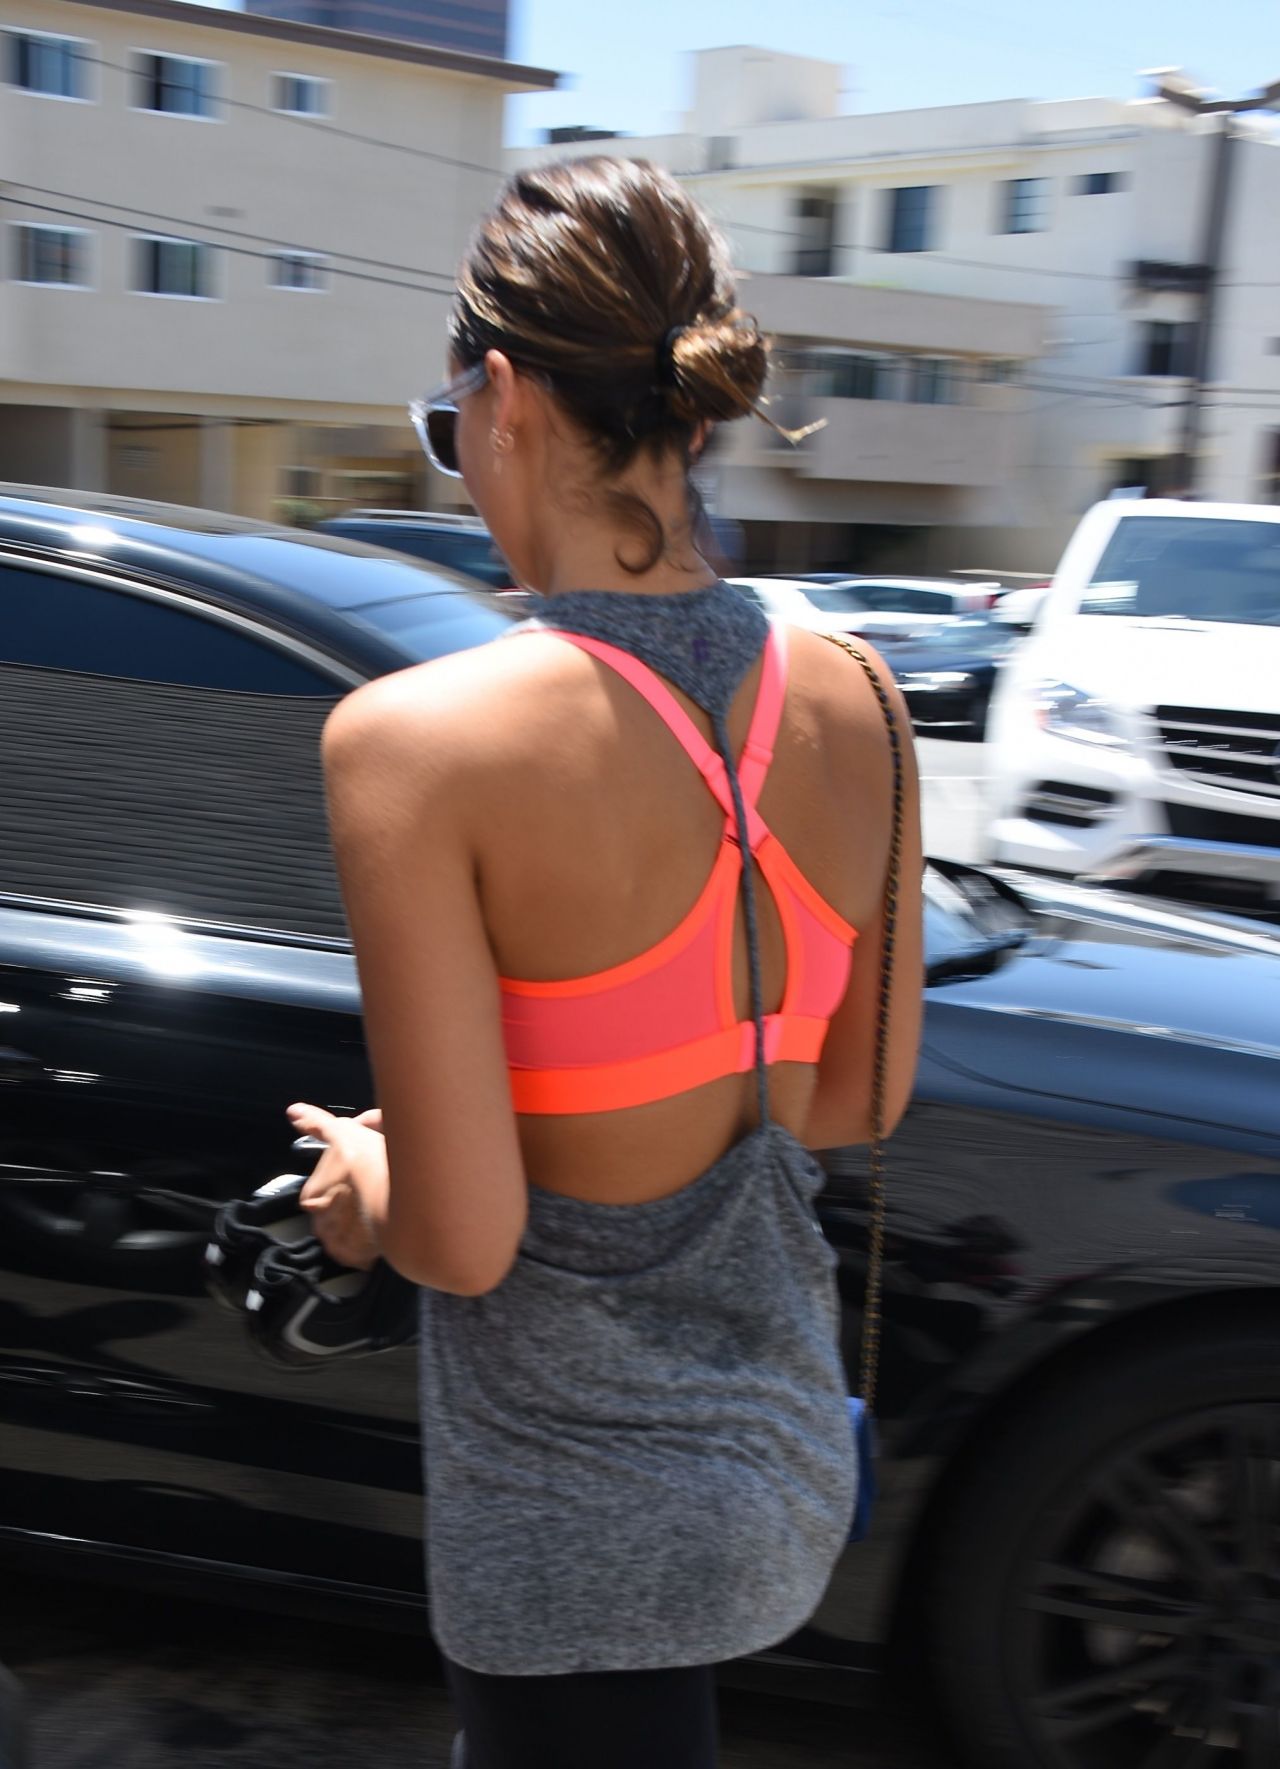 Jessica Alba in Leggings - at a Soul Cycle Class in LA, July 2015